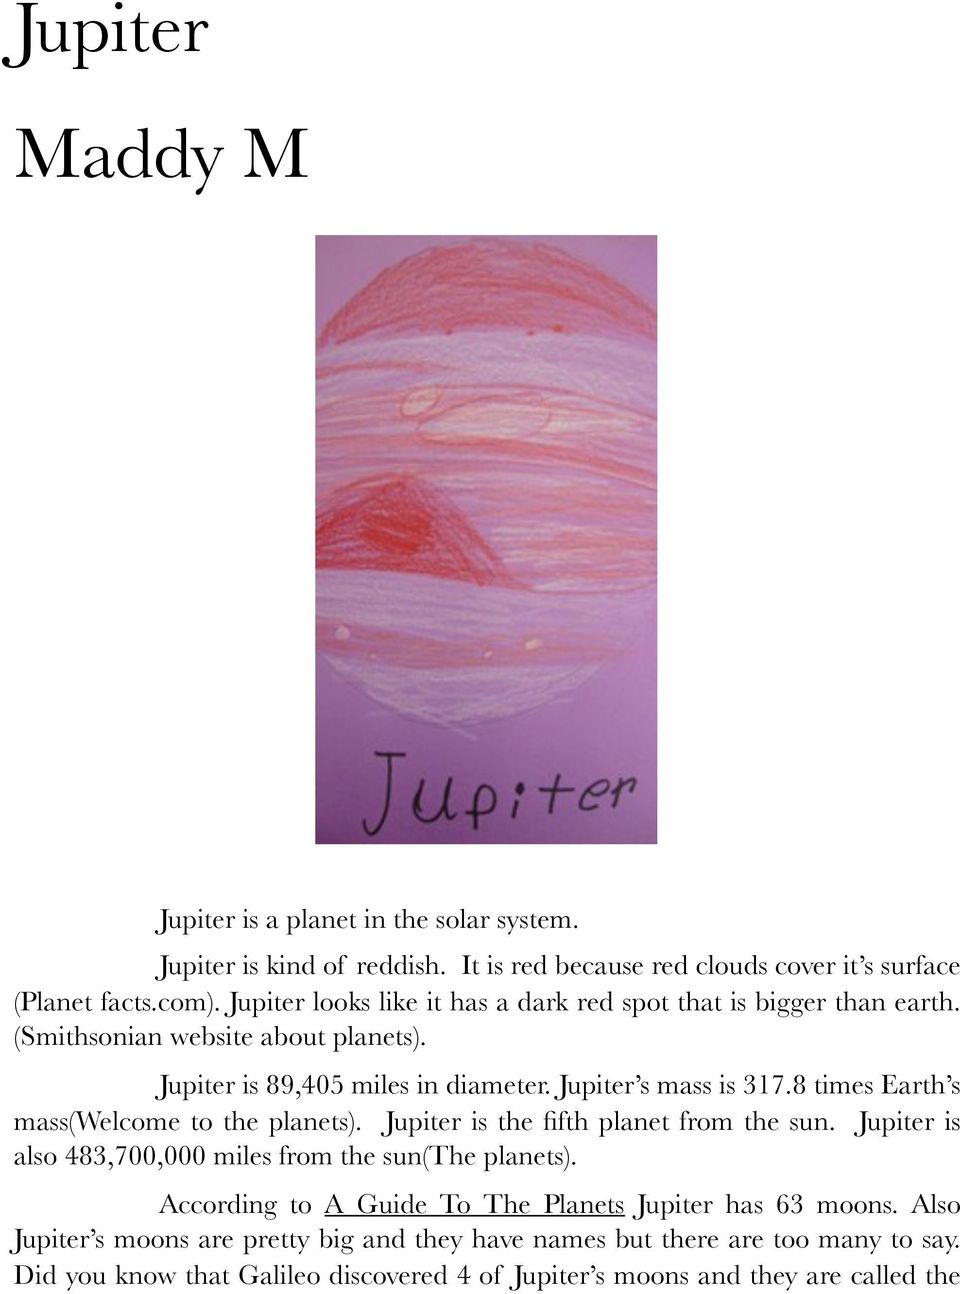 8 times Earth s mass(welcome to the planets). Jupiter is the fifth planet from the sun. Jupiter is also 483,700,000 miles from the sun(the planets).